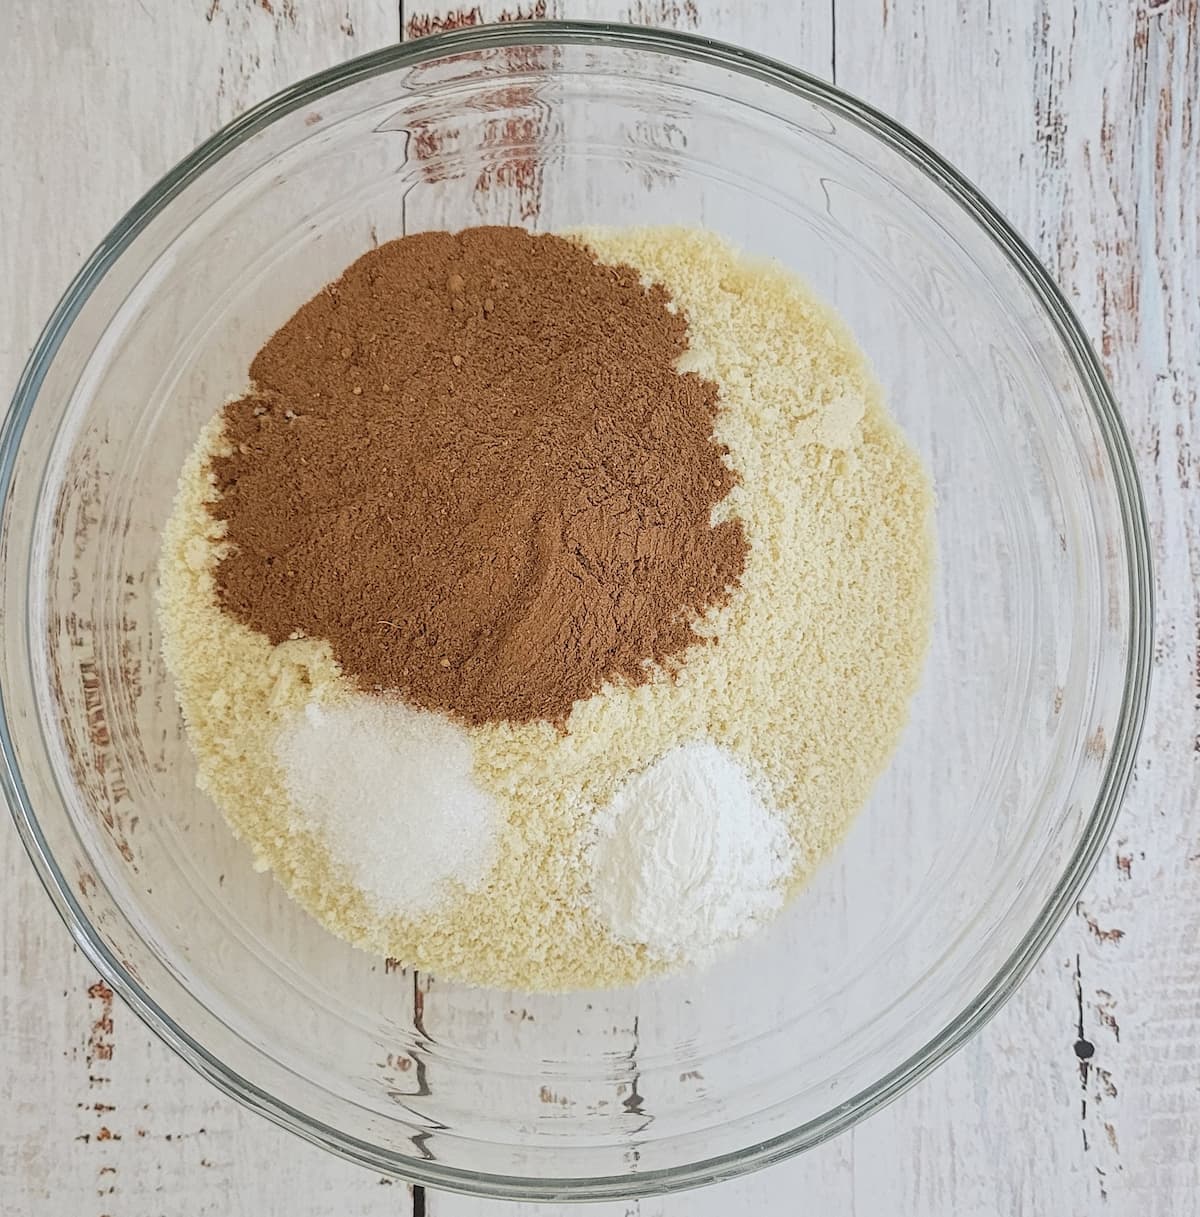 almond flour, cocoa powder, salt and baking powder unmixed in a bowl